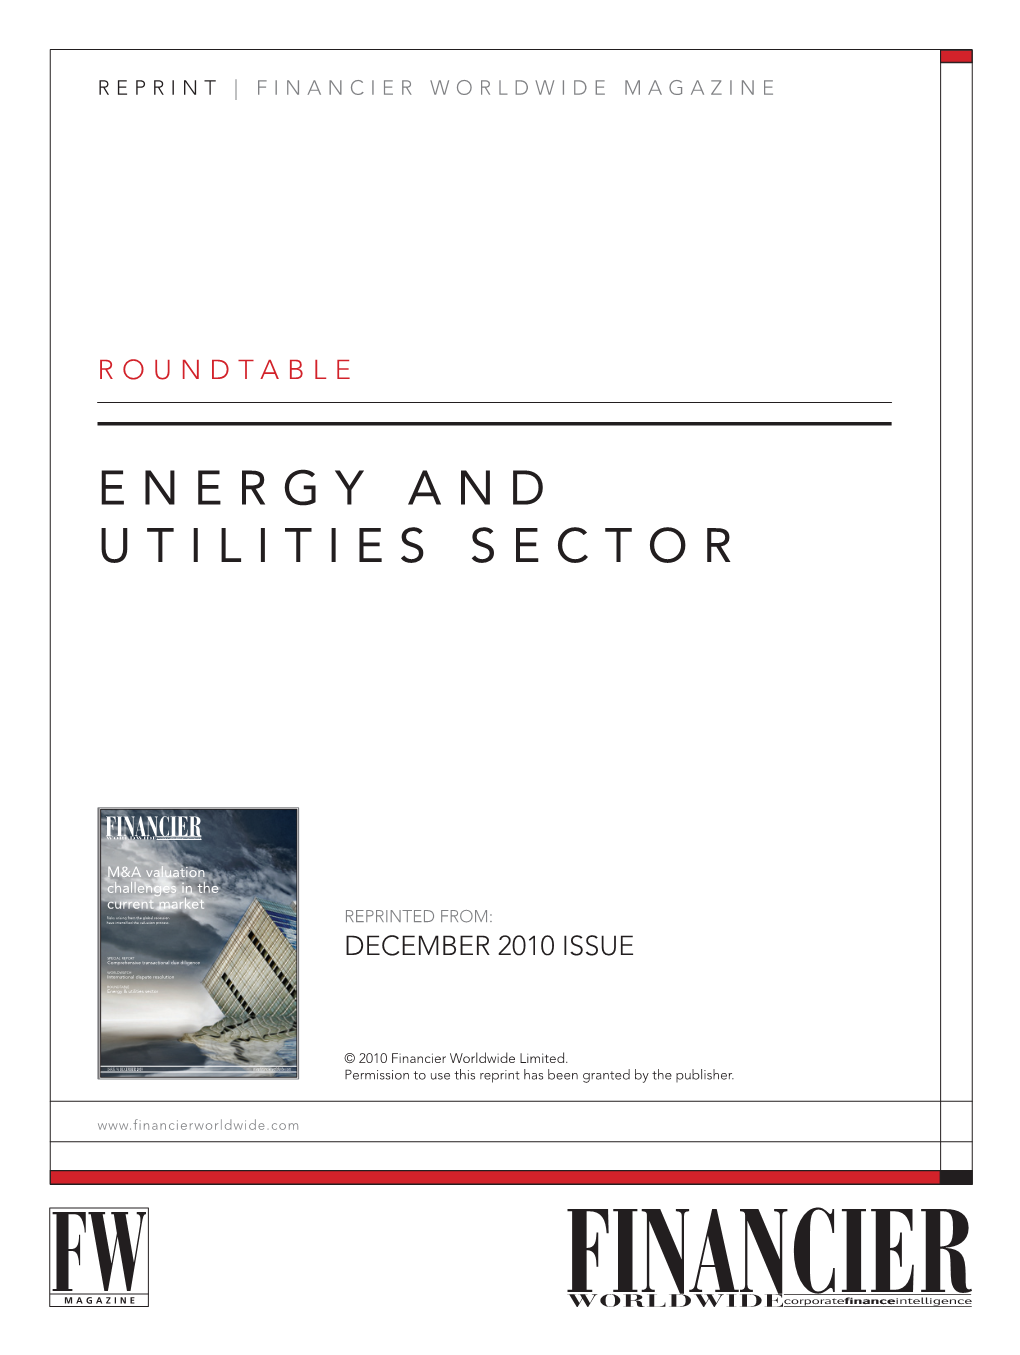 Energy and Utilities Sector Roundtable